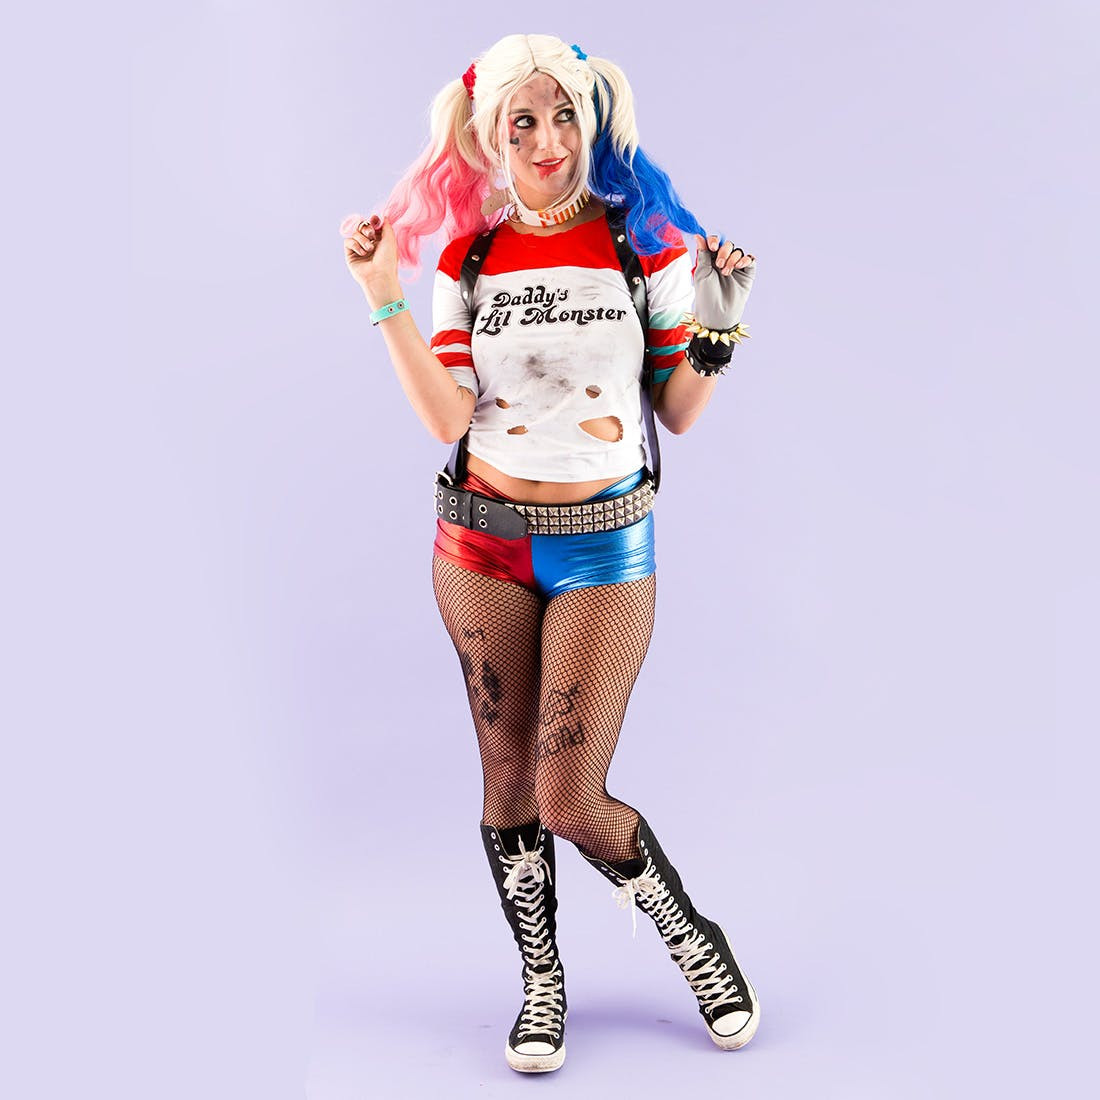 DIY Harley Quinn Costume
 How to Make Suicide Squad’s Harley Quinn Costume for